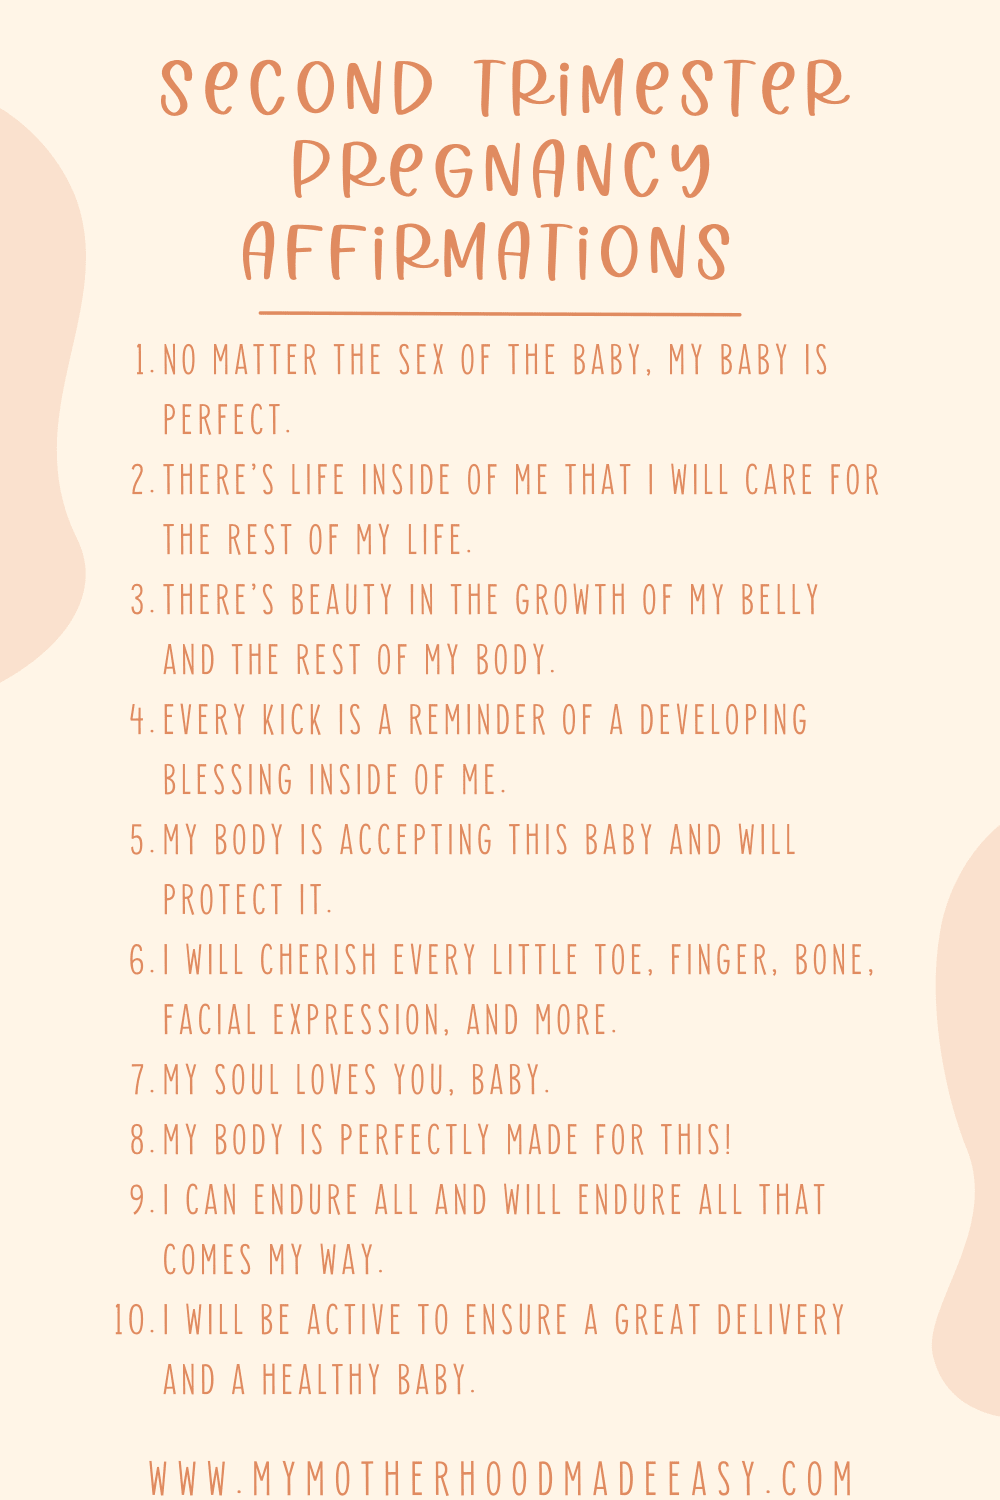 Second Trimester Pregnancy Affirmations Pregnancy Affirmations Second trimester pregnancy affirmations pregnancy affirmations for anxiety positive affirmations for healthy baby